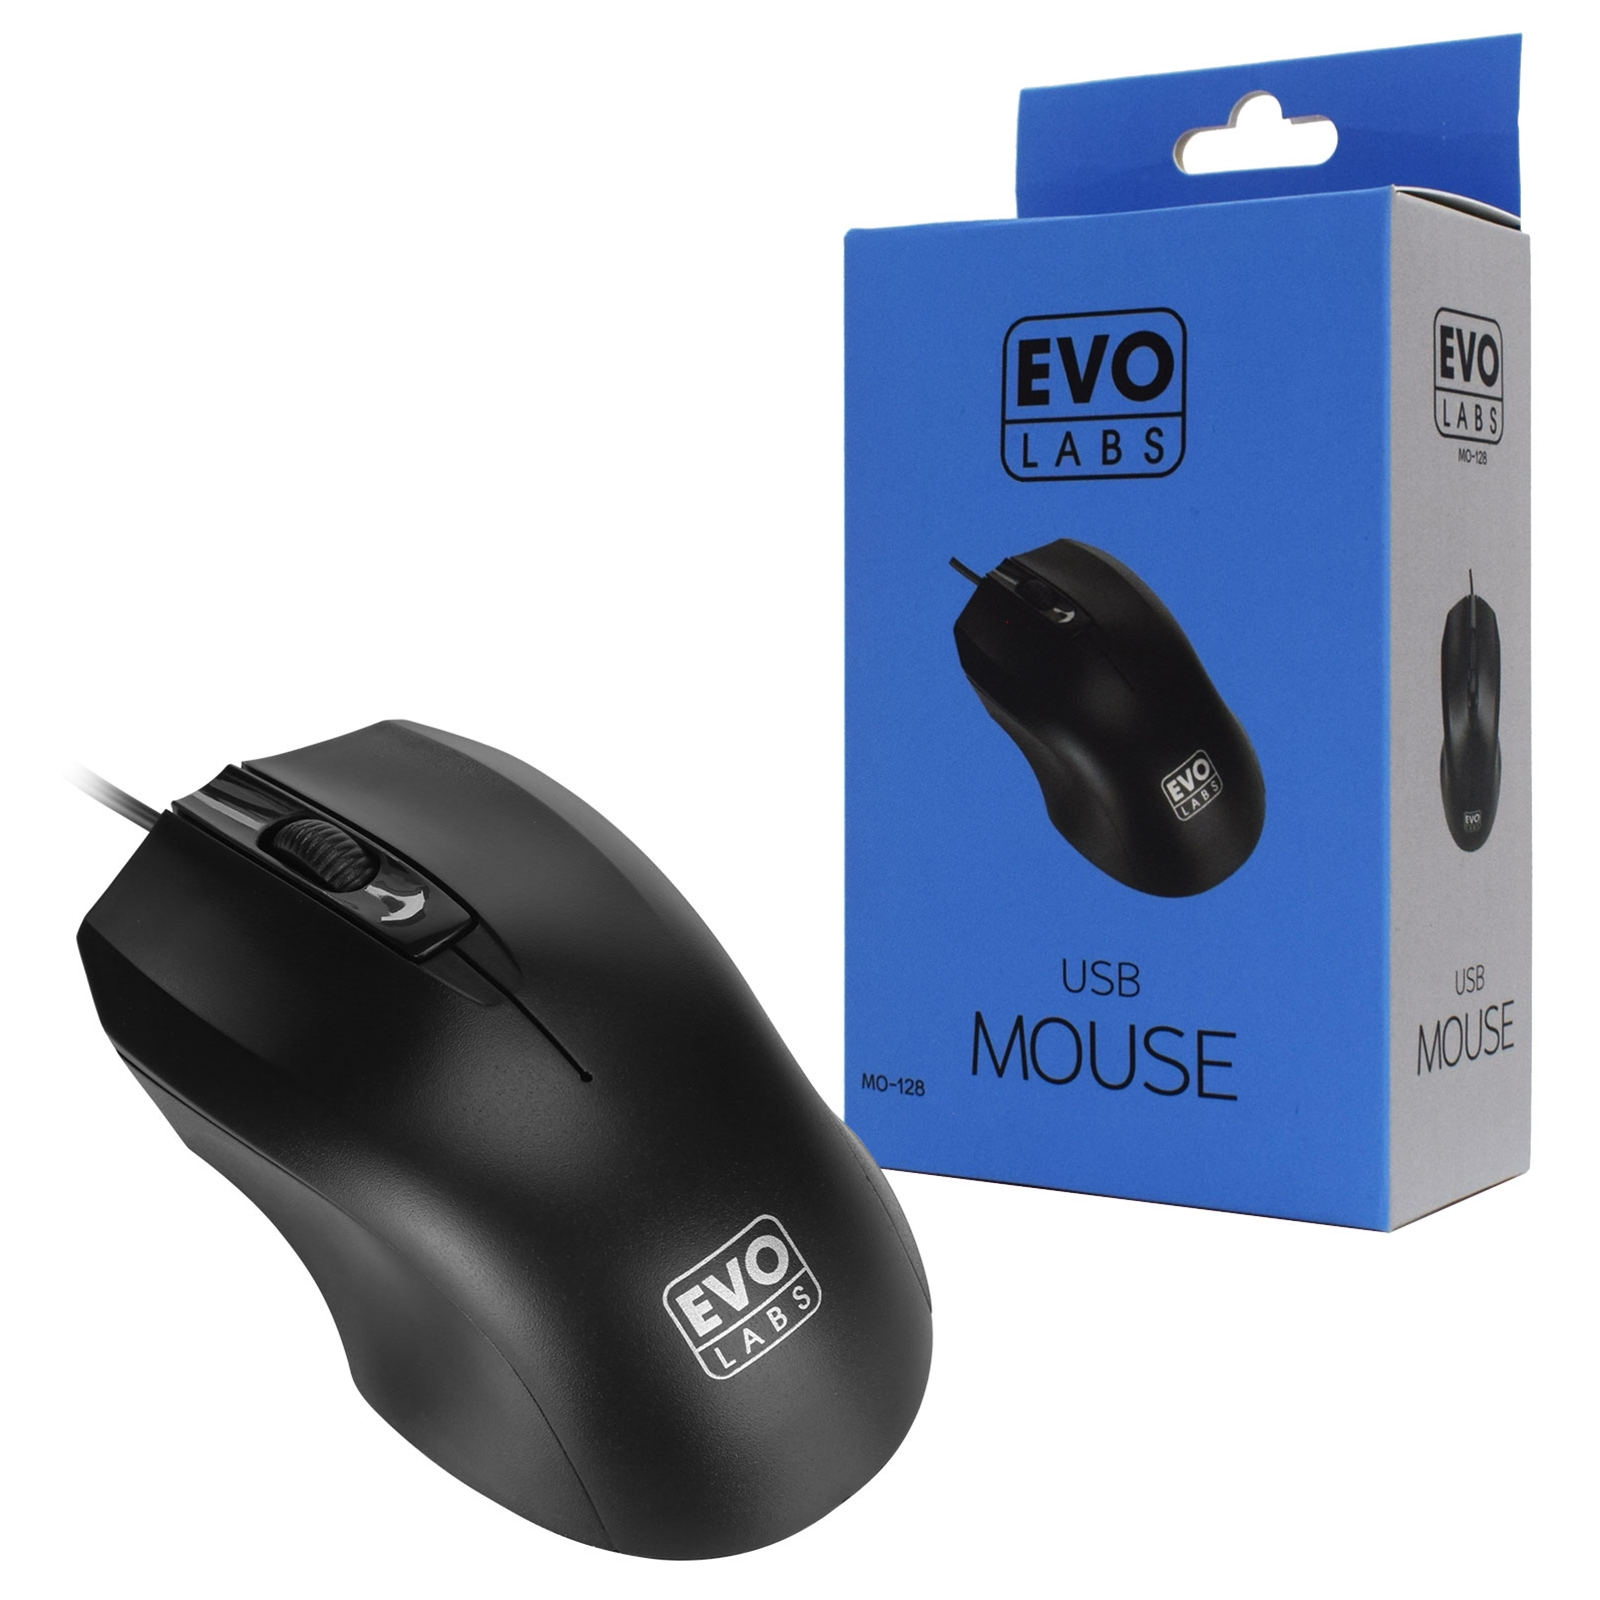 MO-128 EVO LABS MO-128 Wired USB Plug and Play Mouse, 800 DPI Optical Tracking, 3 Button with Scroll Wheel,  Ambidextrous Design, Matte Black